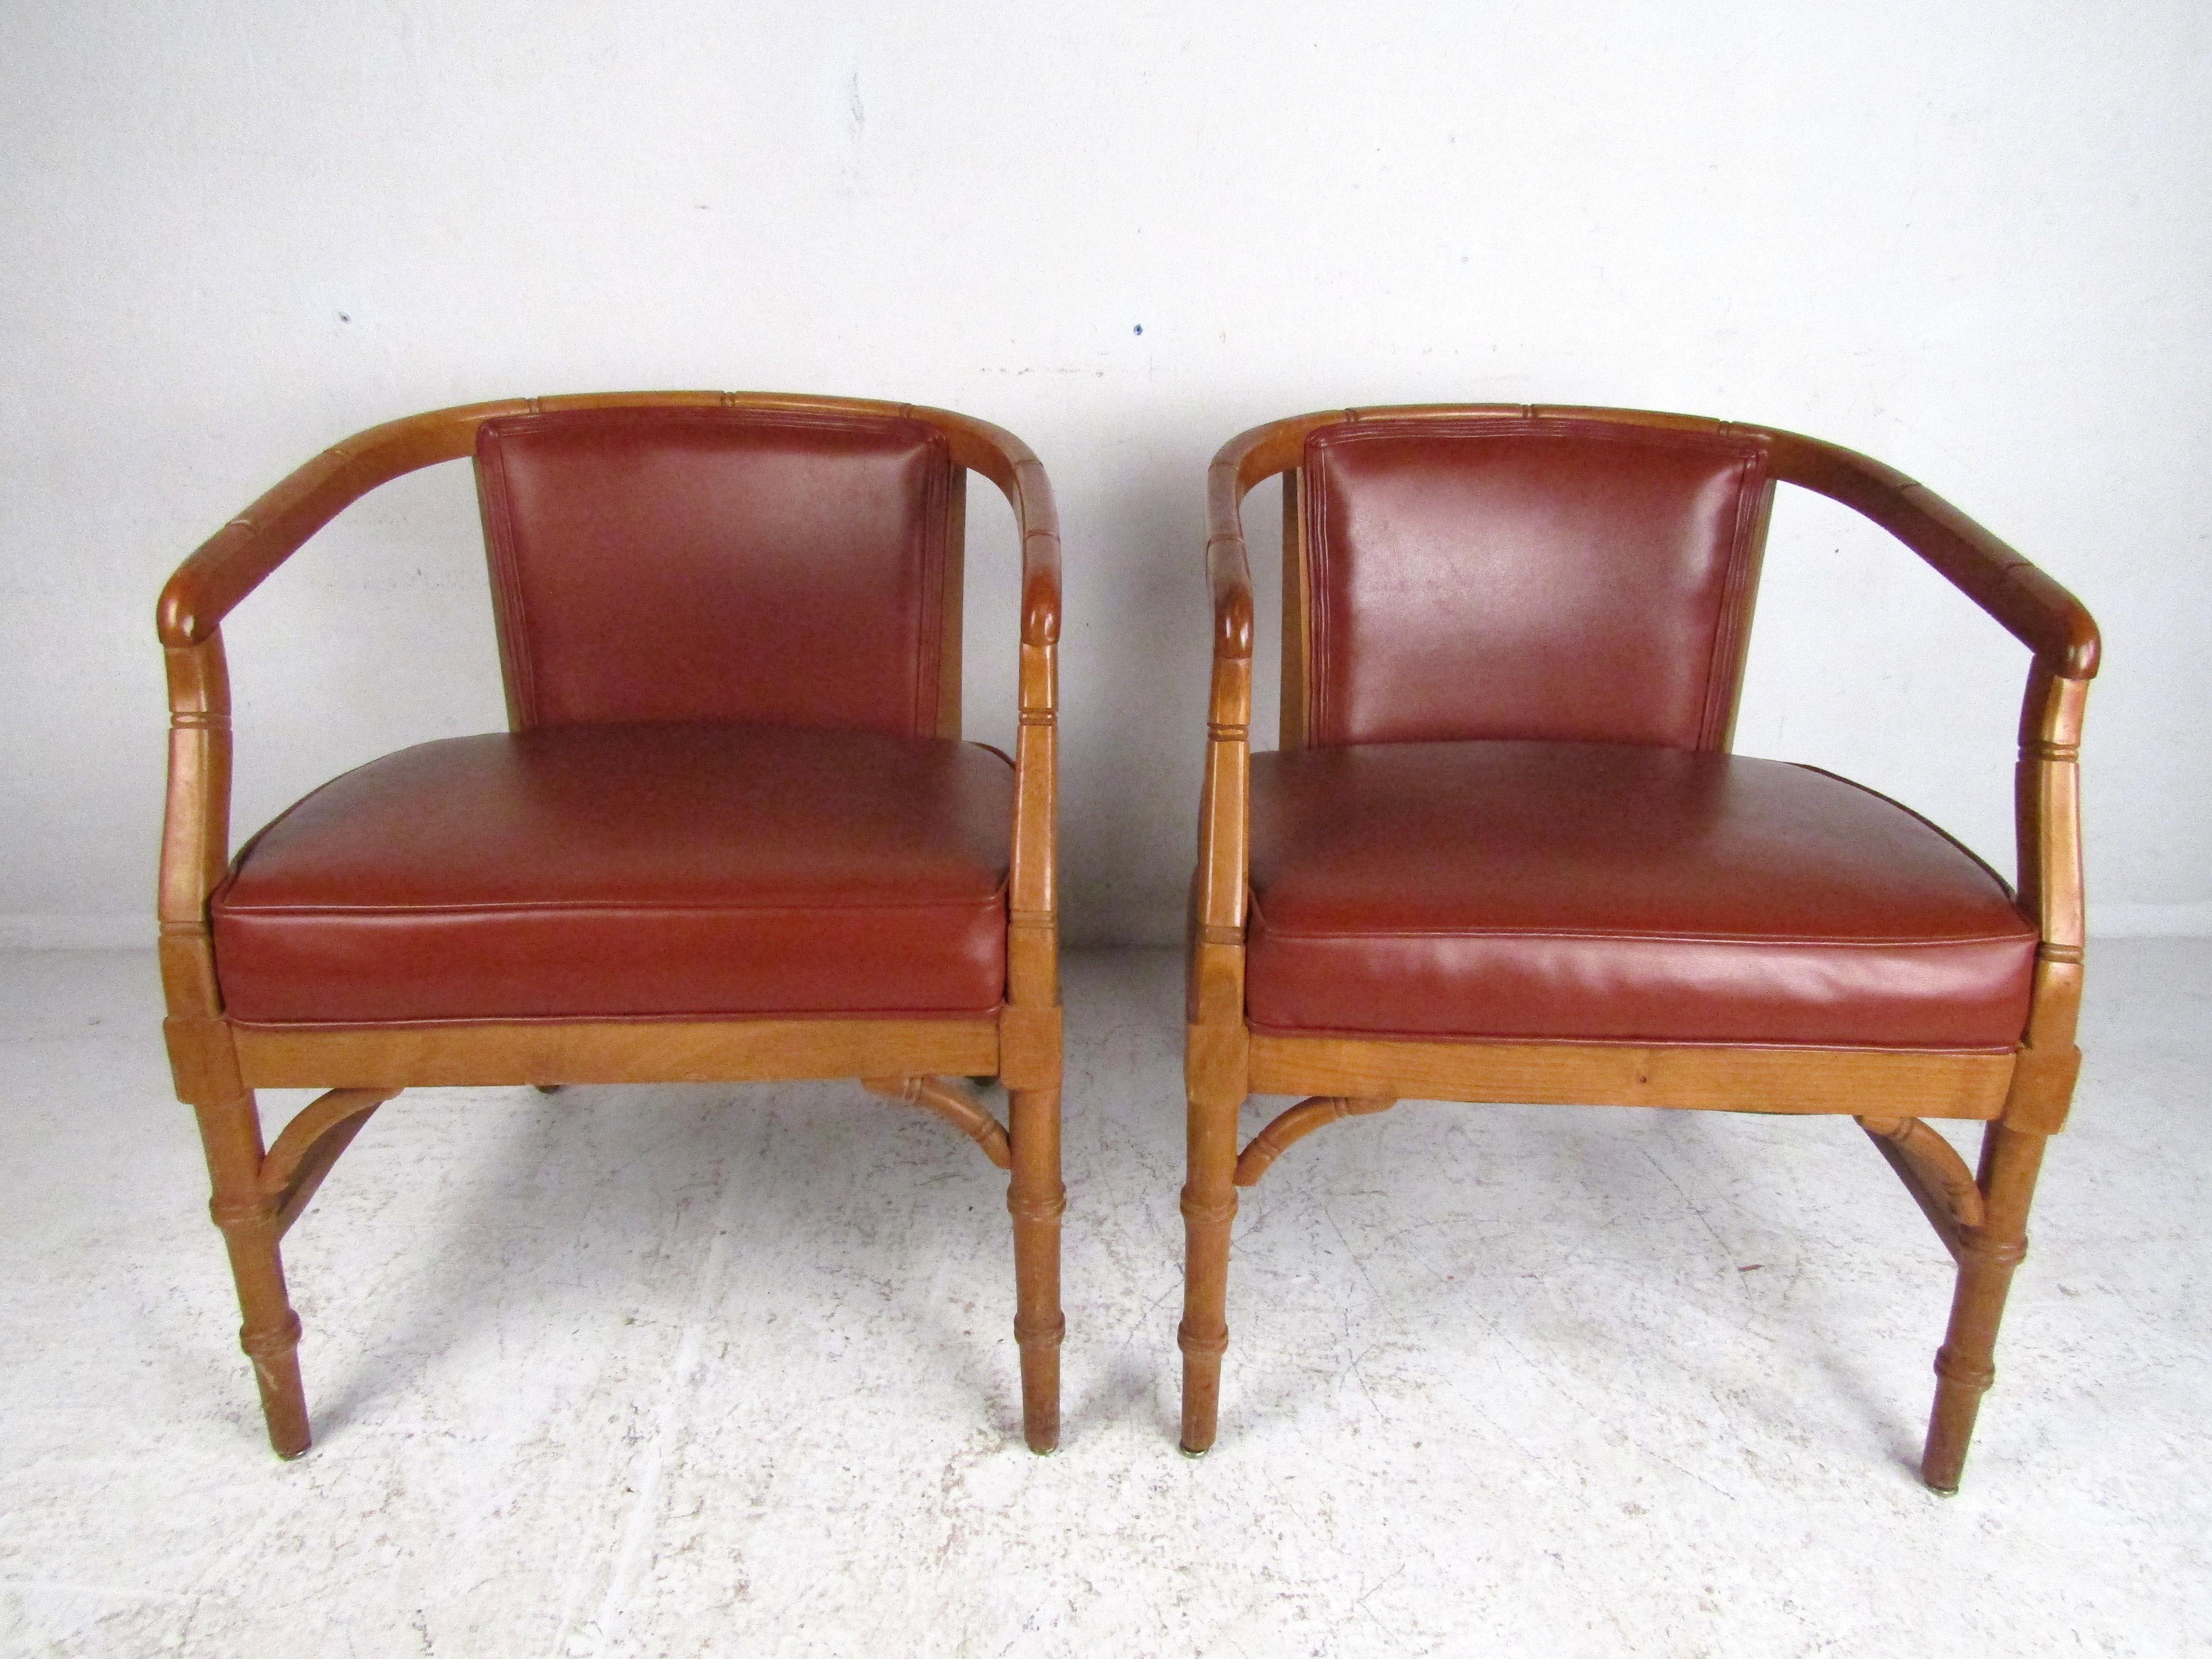 Stunning pair of Mid-Century Modern armchairs. Seats and backs are covered in a vintage faux-leather upholstery. Stylishly contoured frame. Please confirm item location with dealer (NJ or NY).